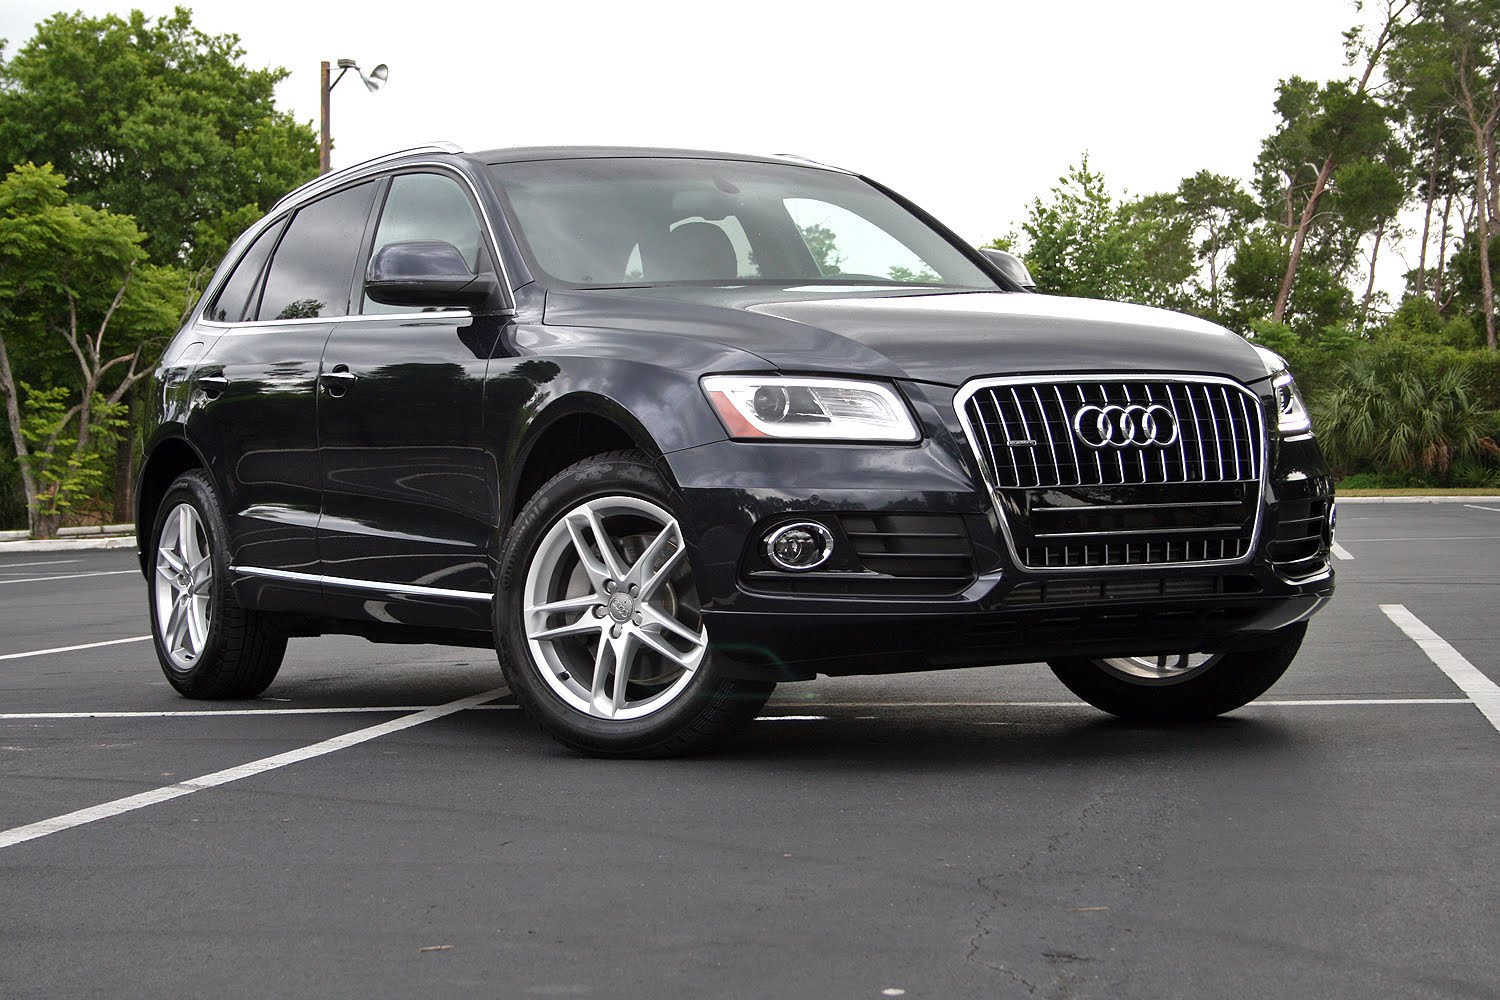 2015 Audi Q5 prices and expert review  The Car Connection